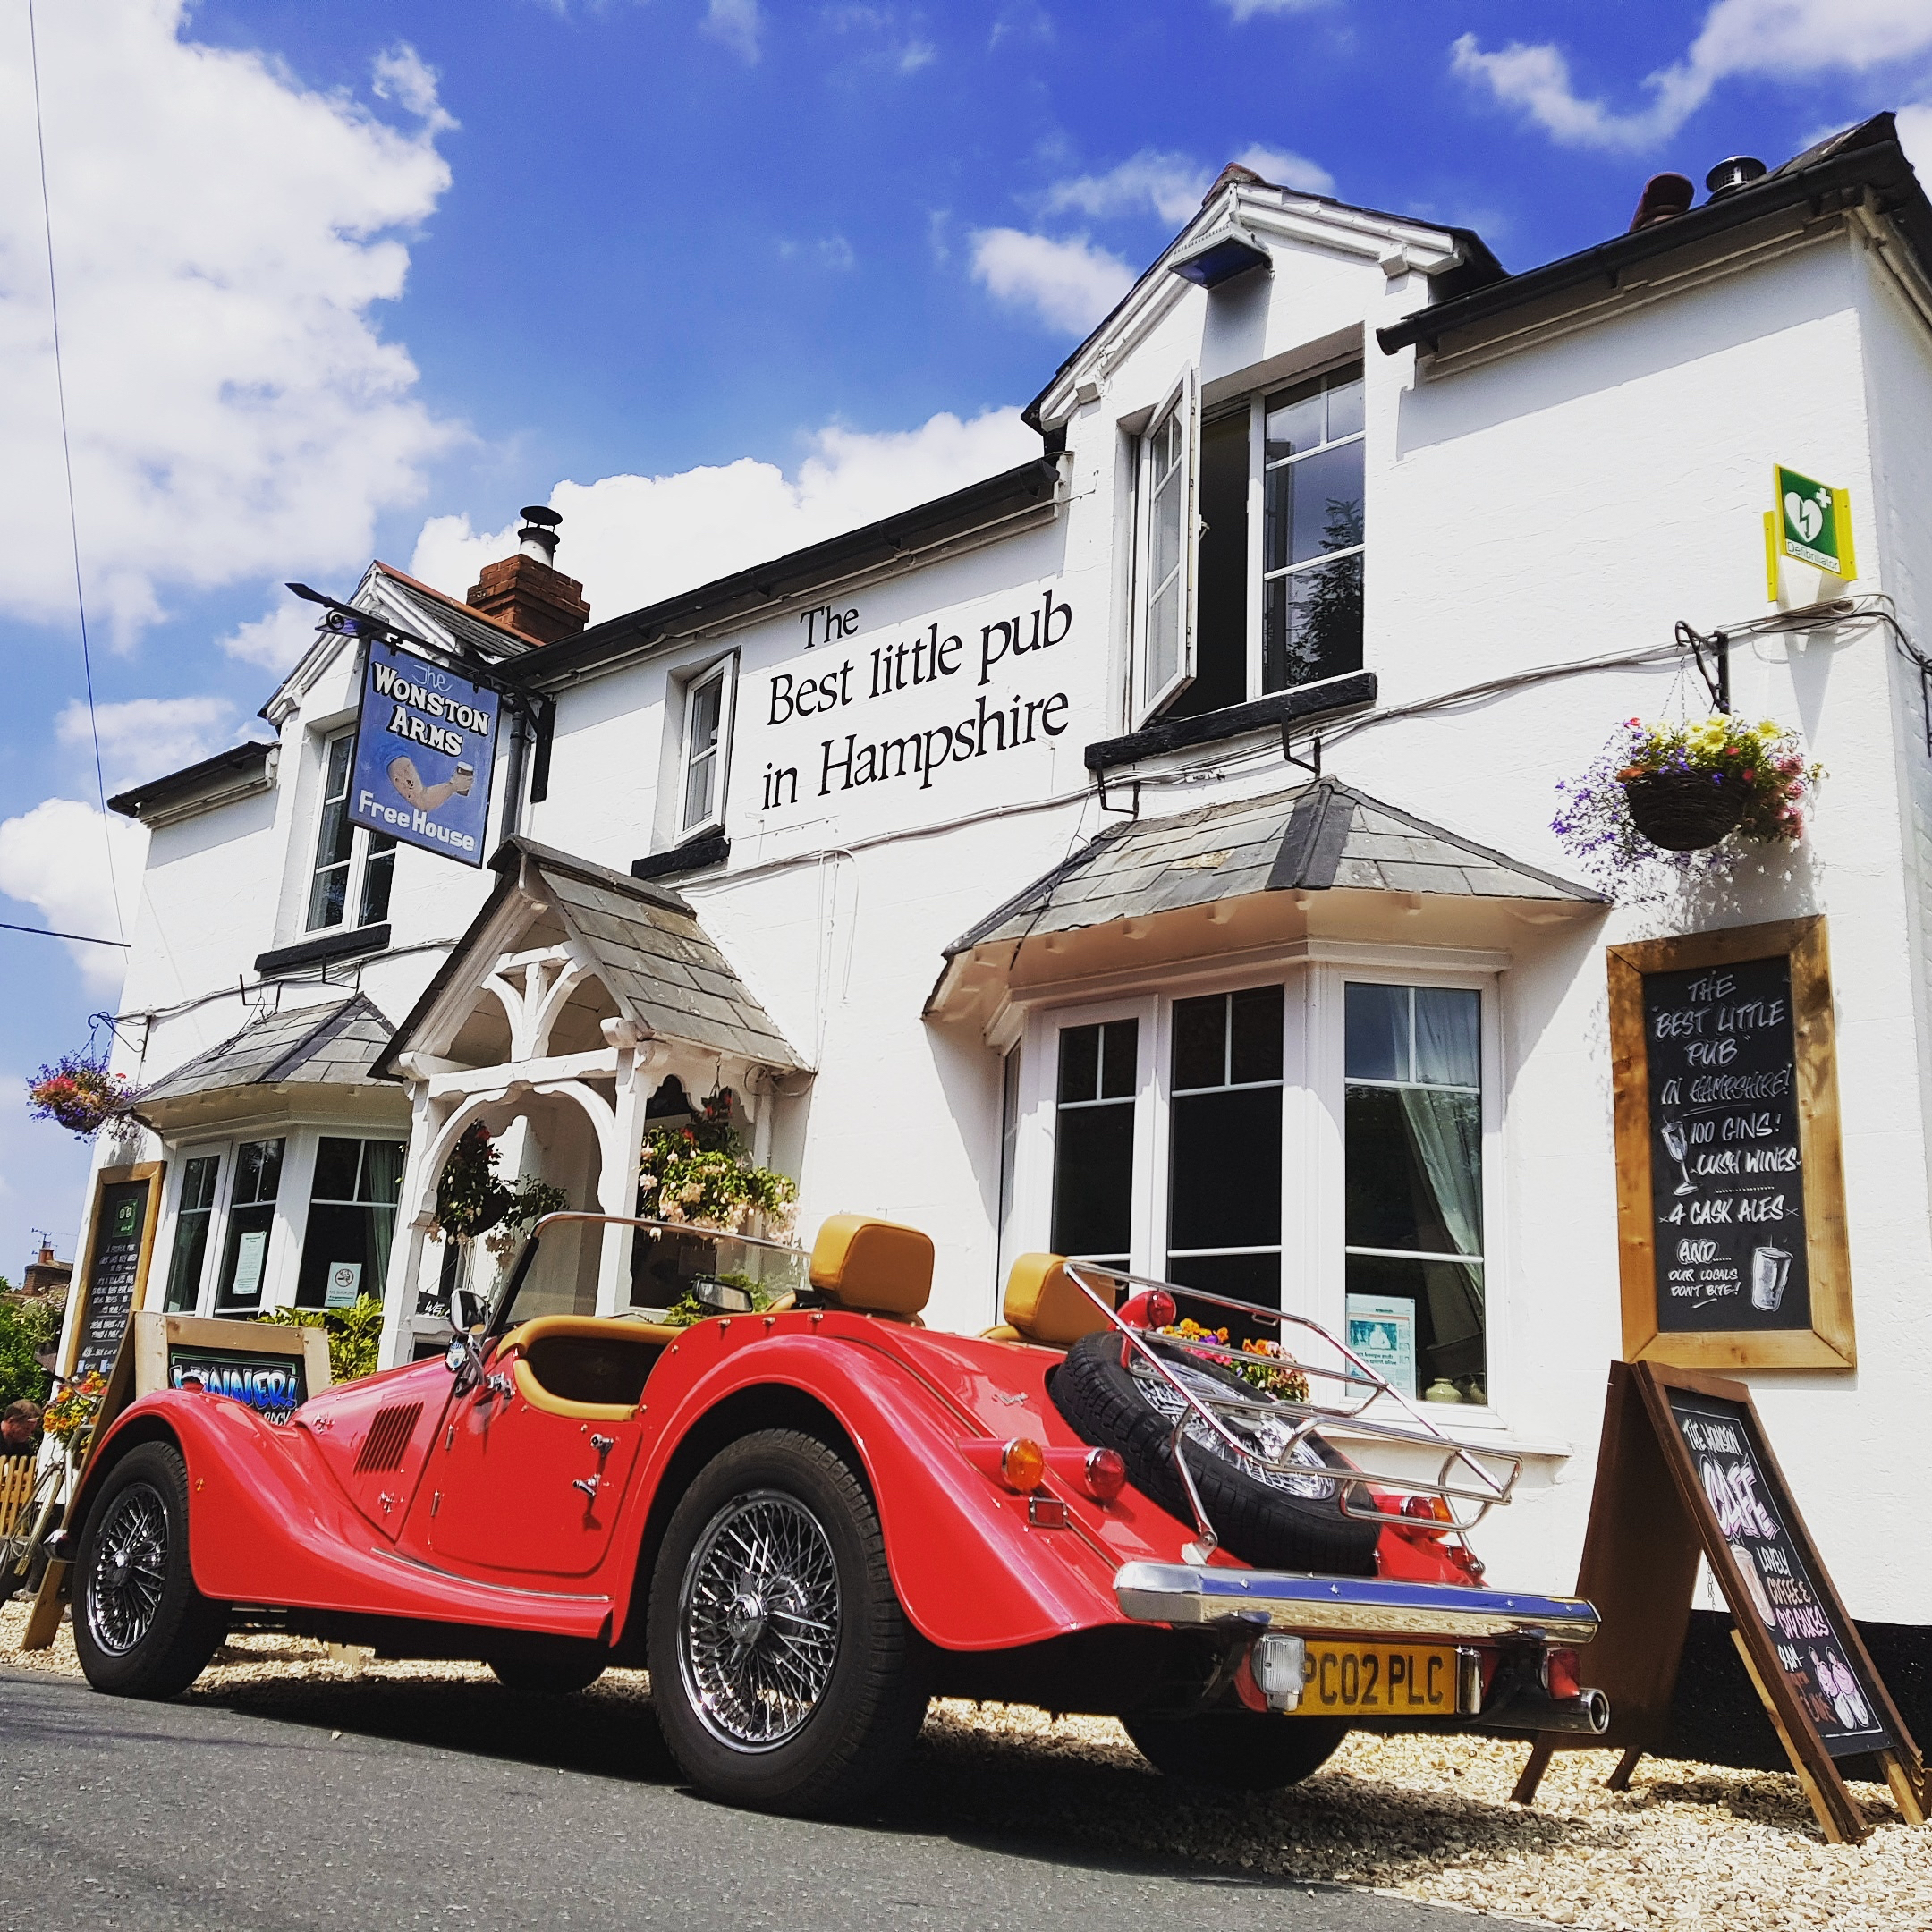 The Wonston Arms was CAMRA pub of the year in 2018